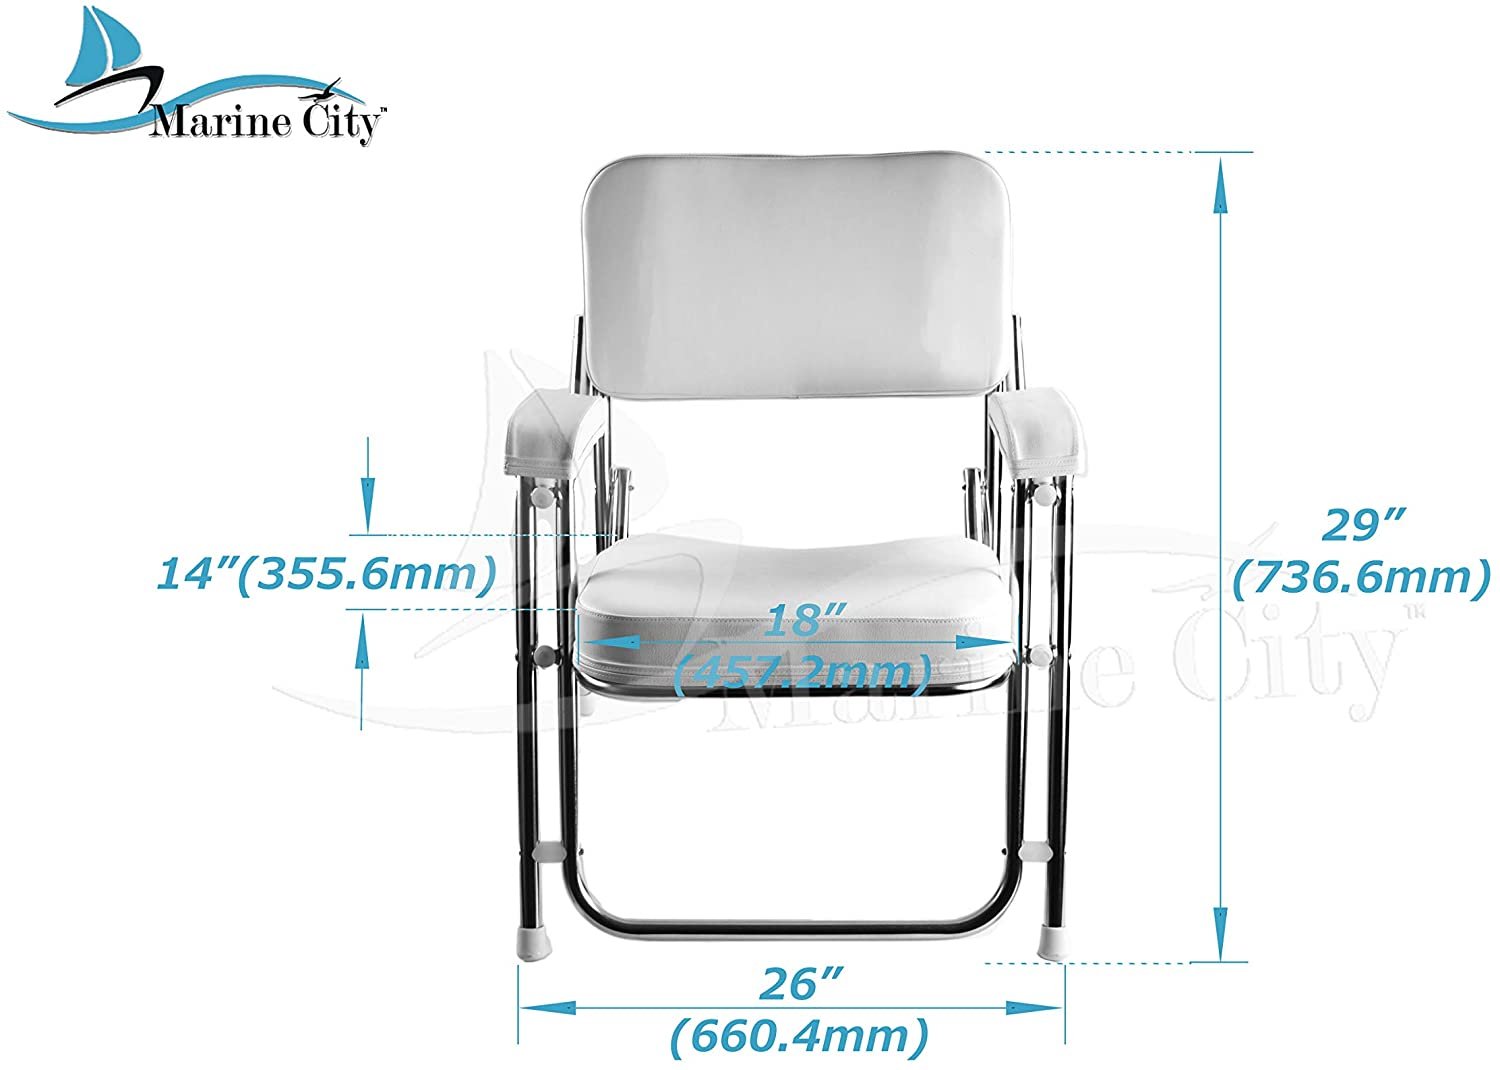 Folding Aluminum Boat Chair with Plastic Armrests Set of 2-PA150